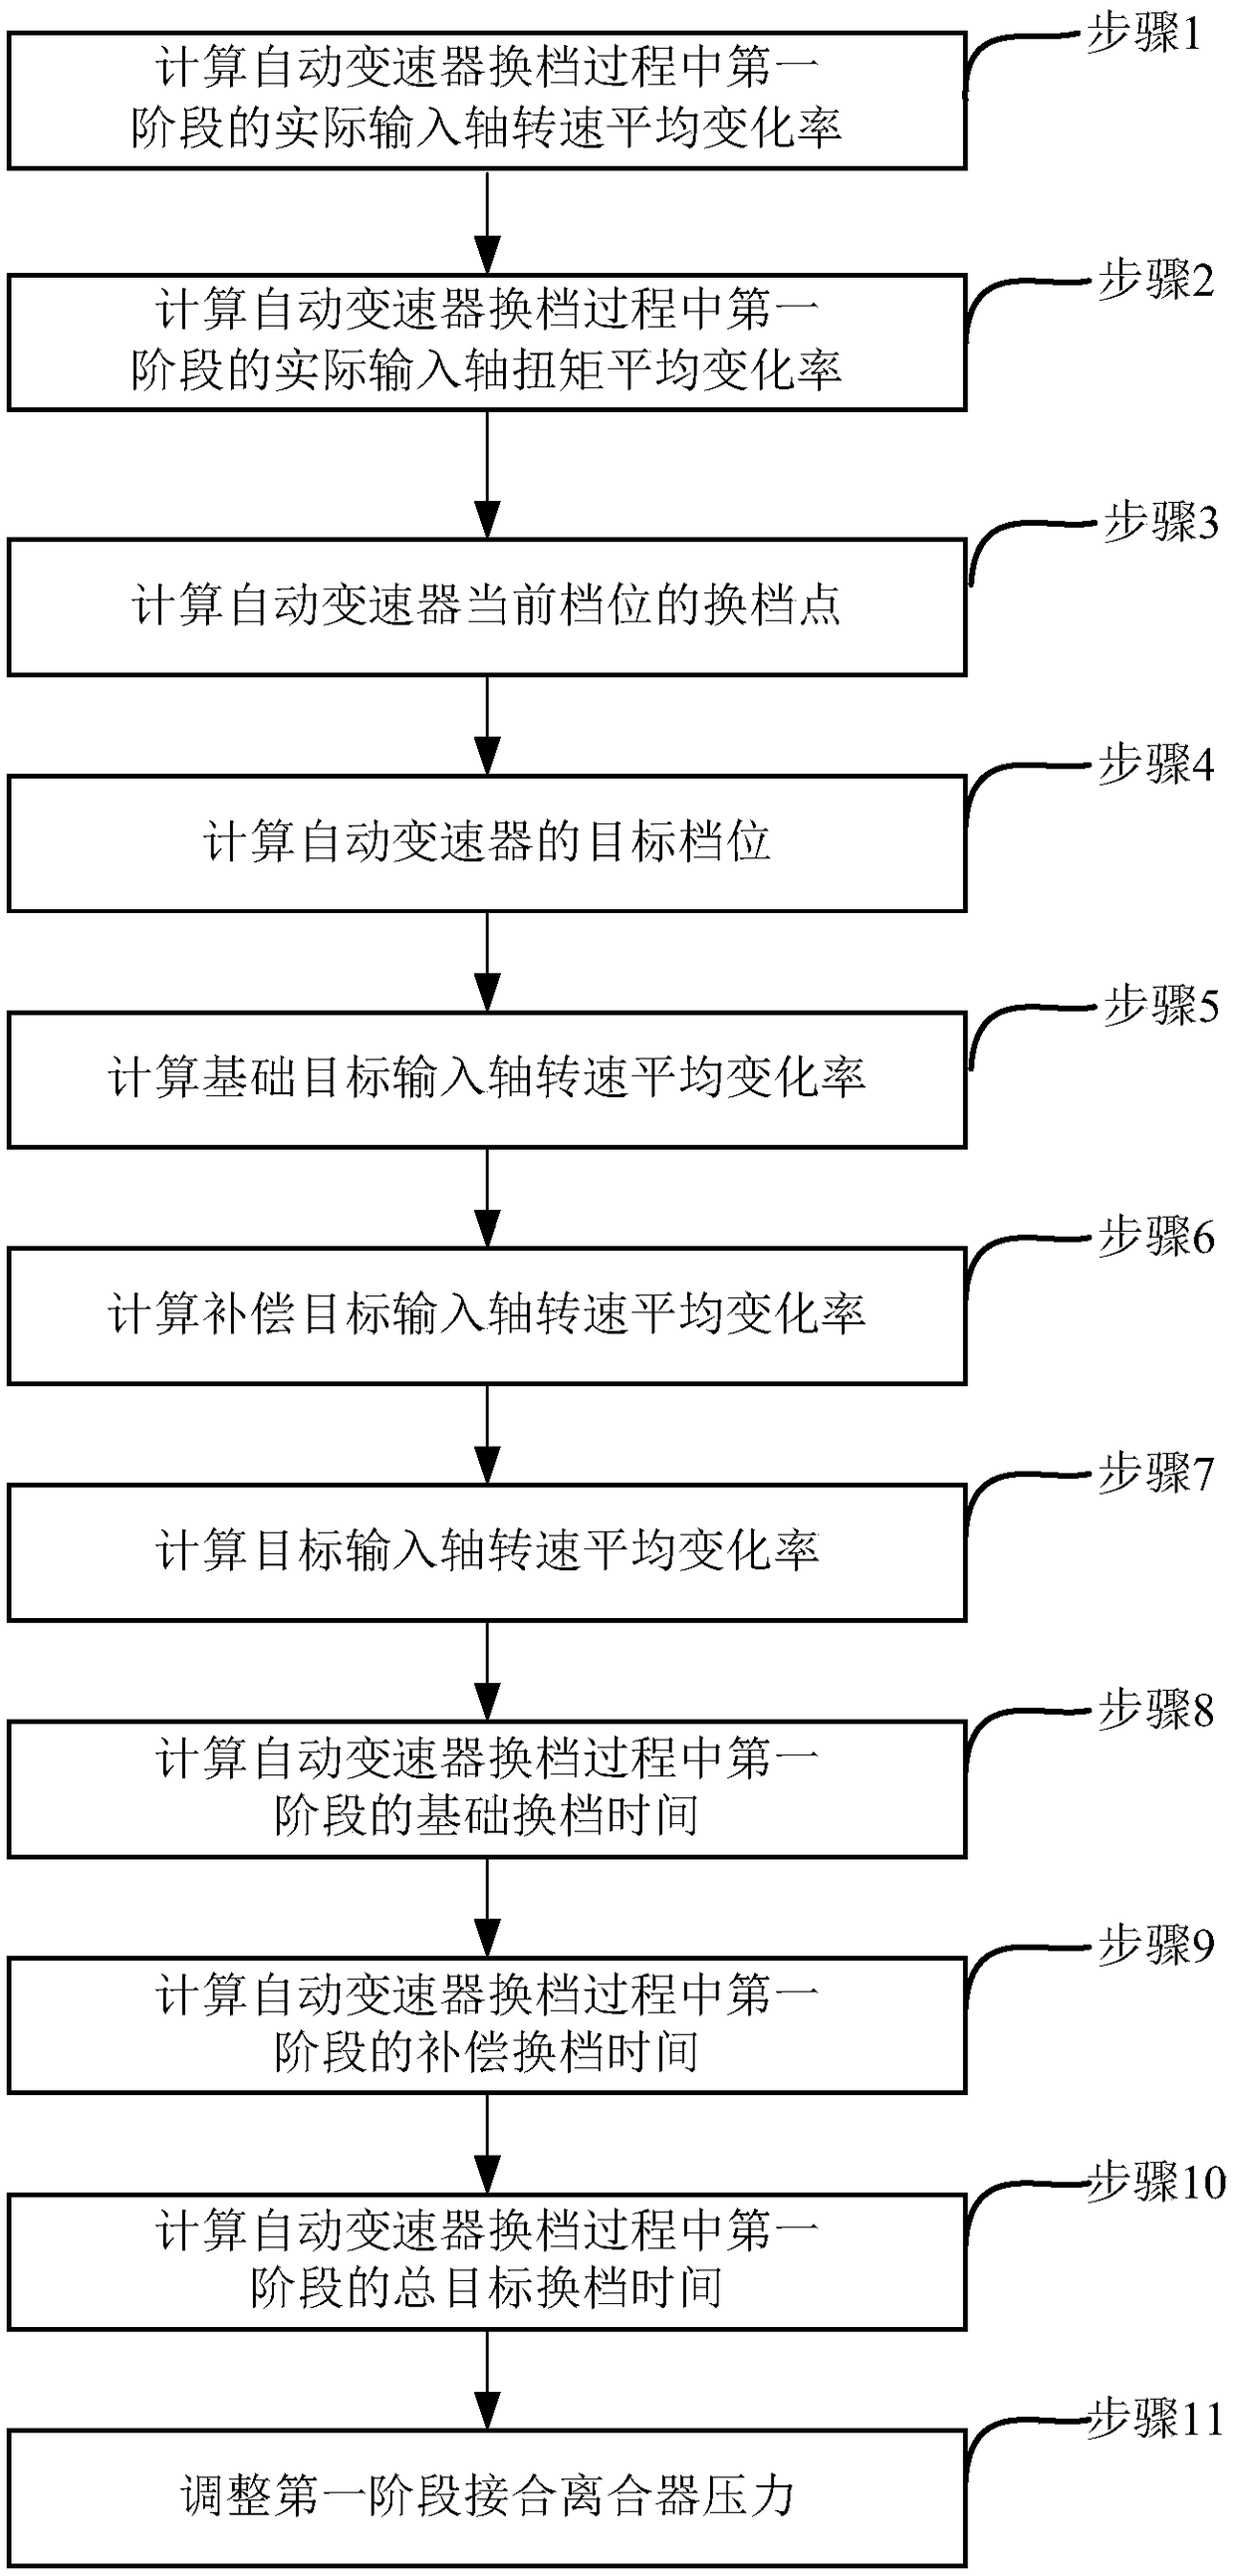 Self-adaptation control method for torque of automatic transmission clutch